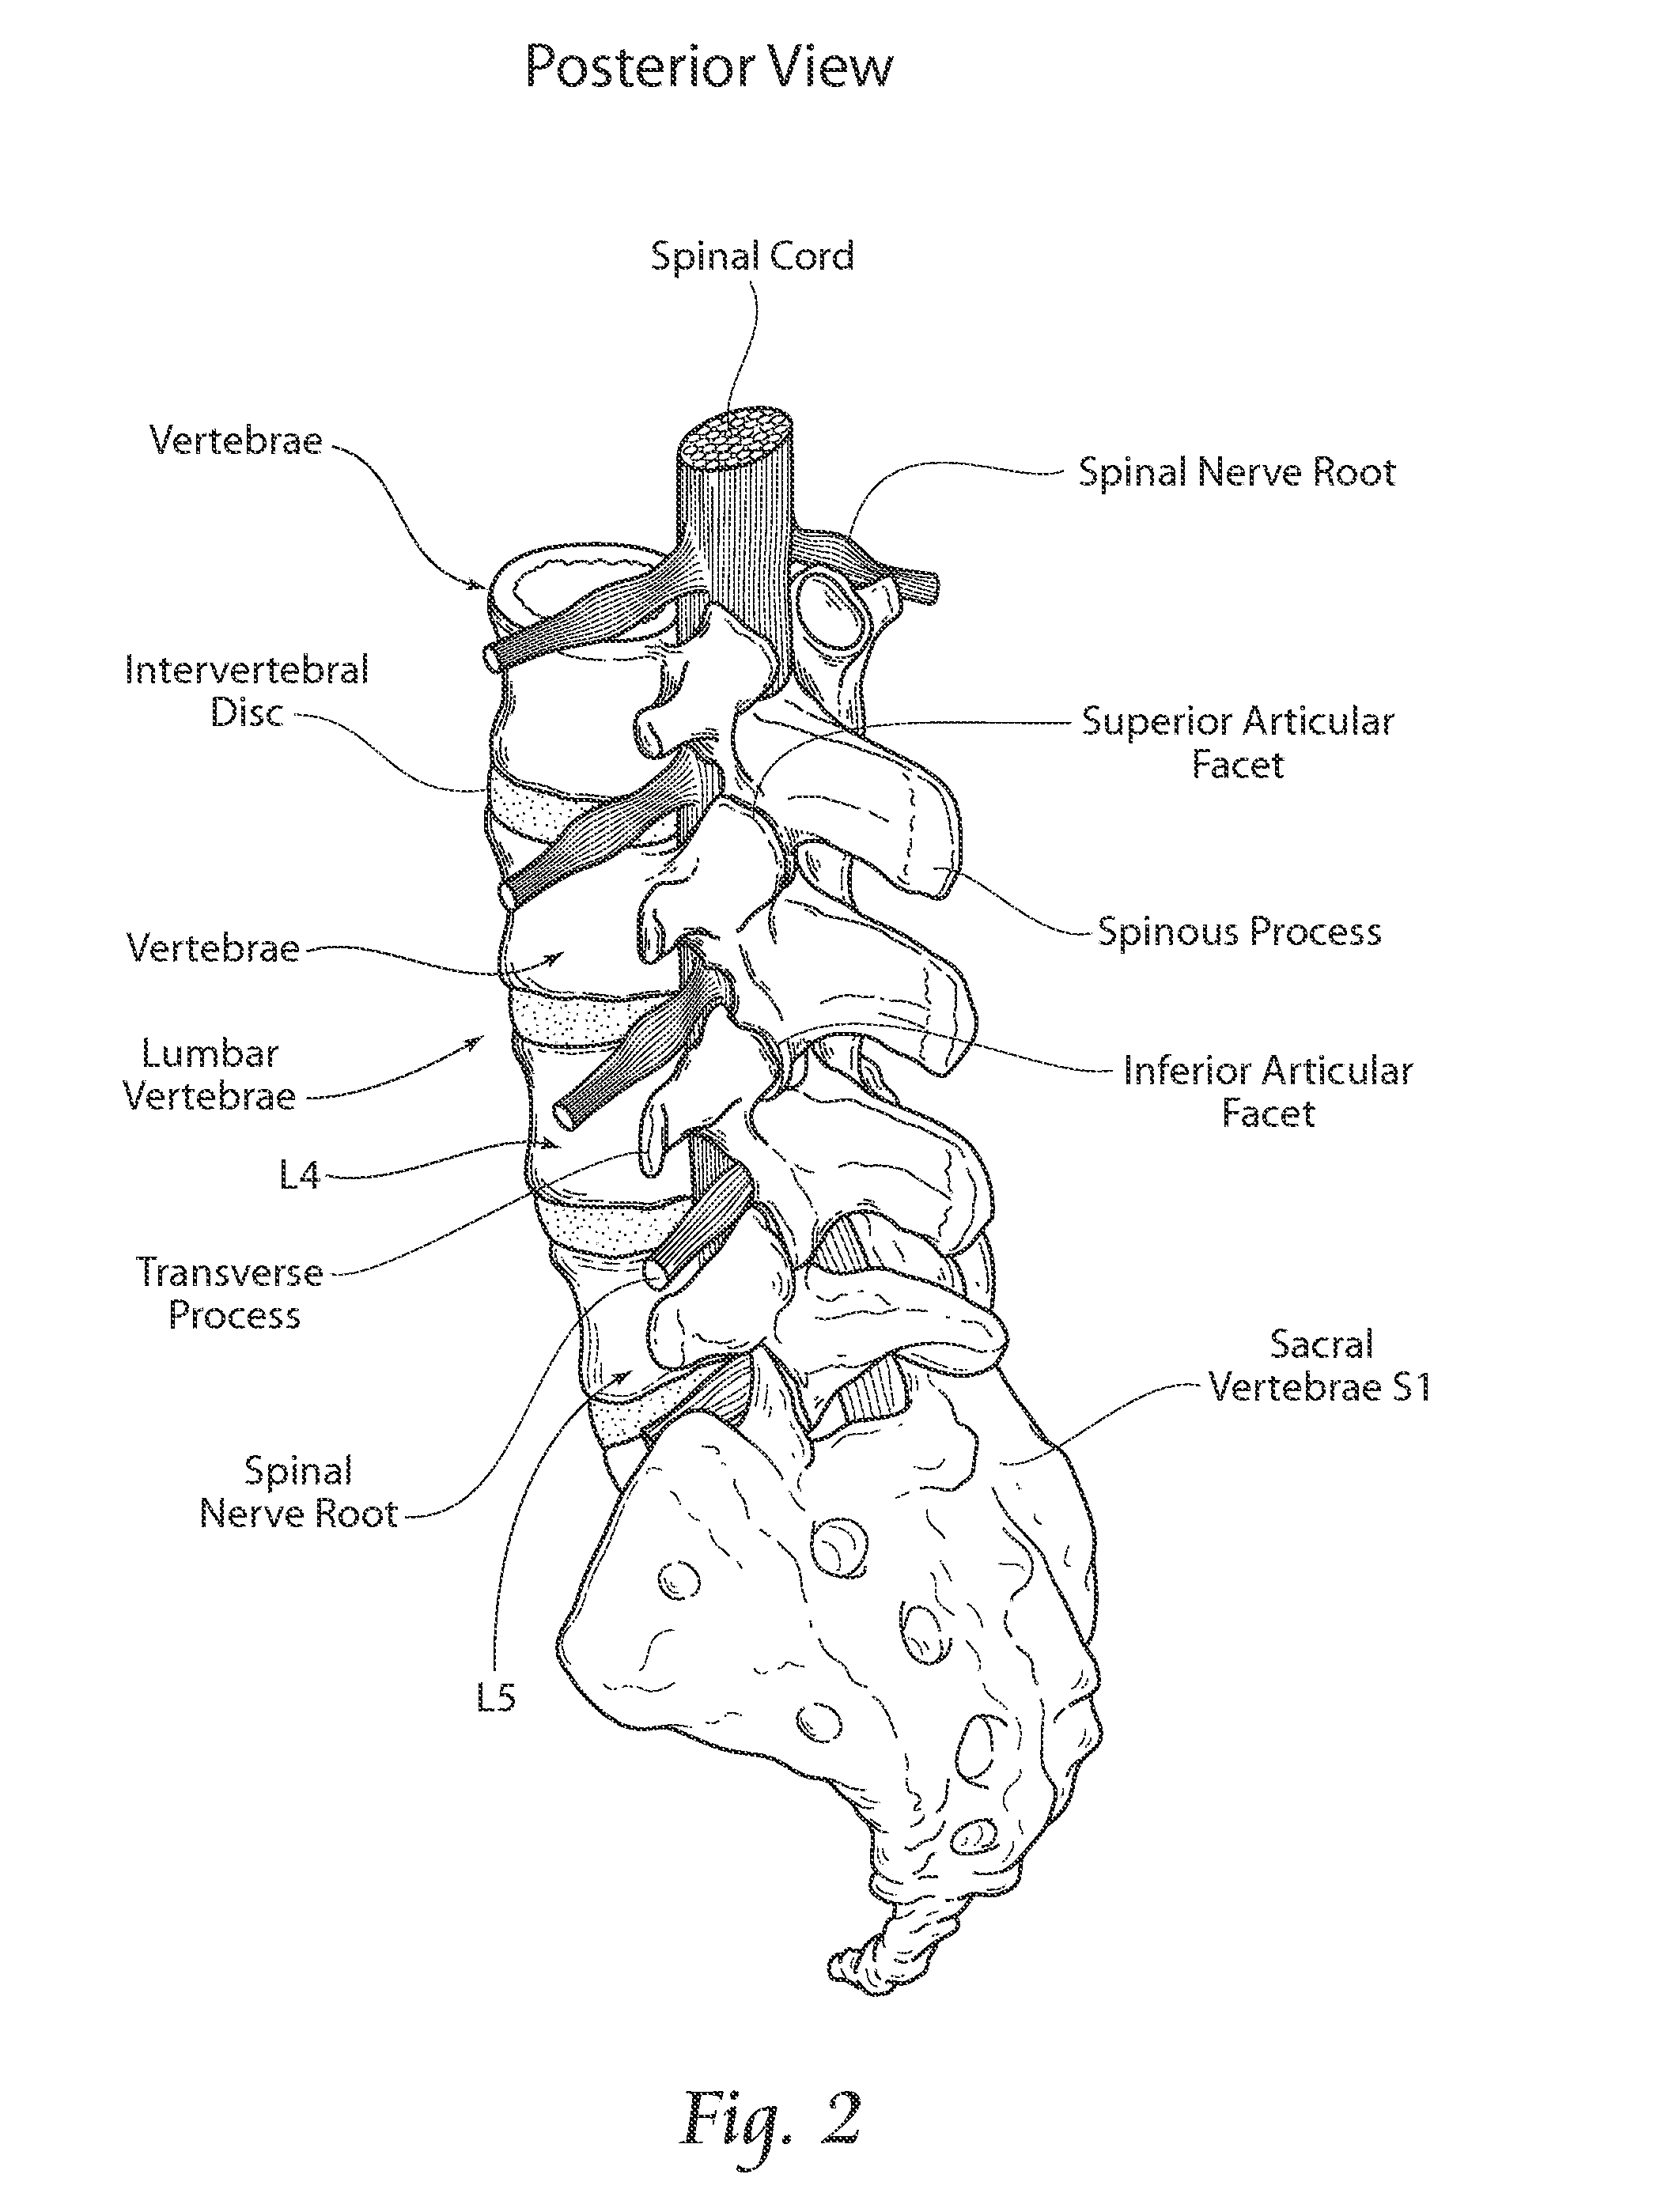 Apparatus, systems, and methods for achieving anterior lumbar interbody fusion